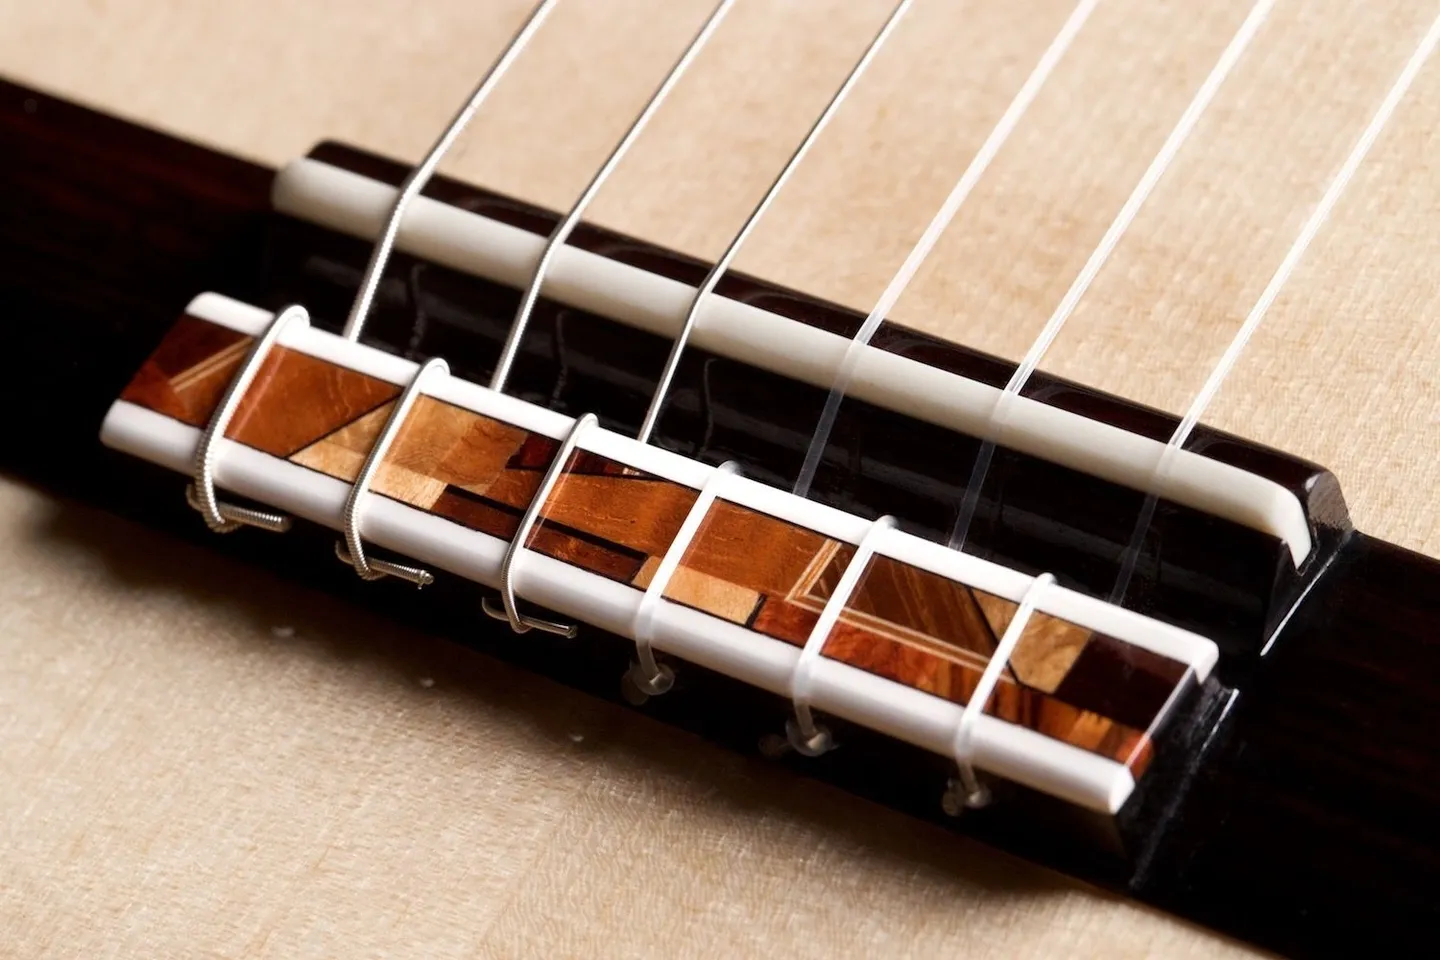 A close up picture of the strings attached to the guitar